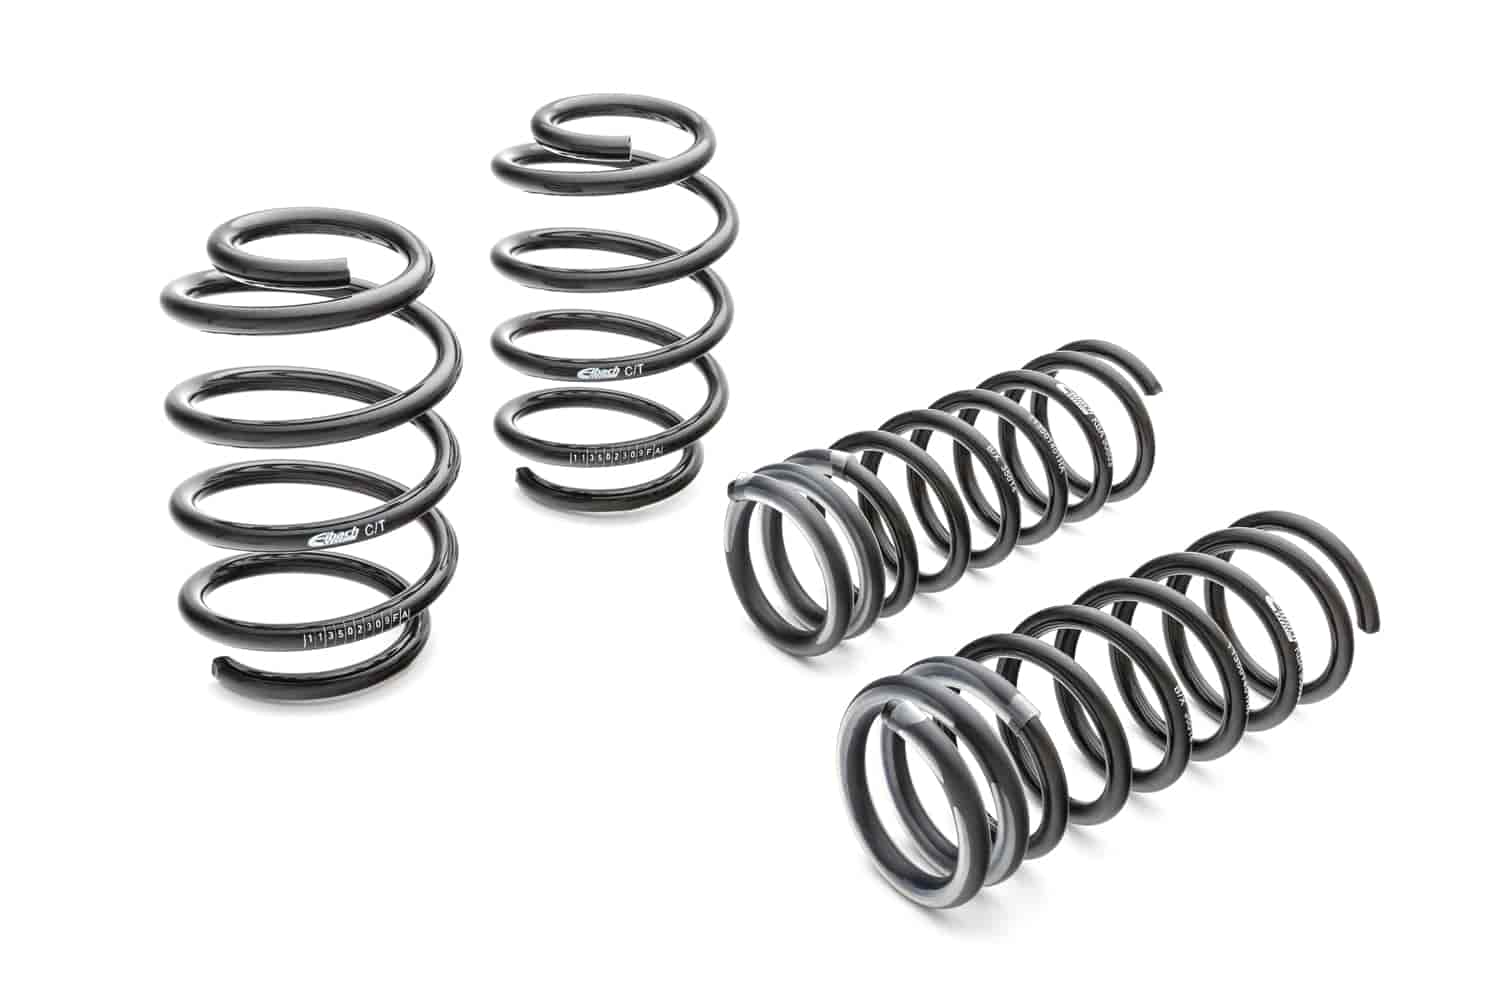 1595.140 Pro-Kit Lowering Springs 2005-2011 Audi A6 Quattro V8 - 1.200 in. Front/Rear Drop